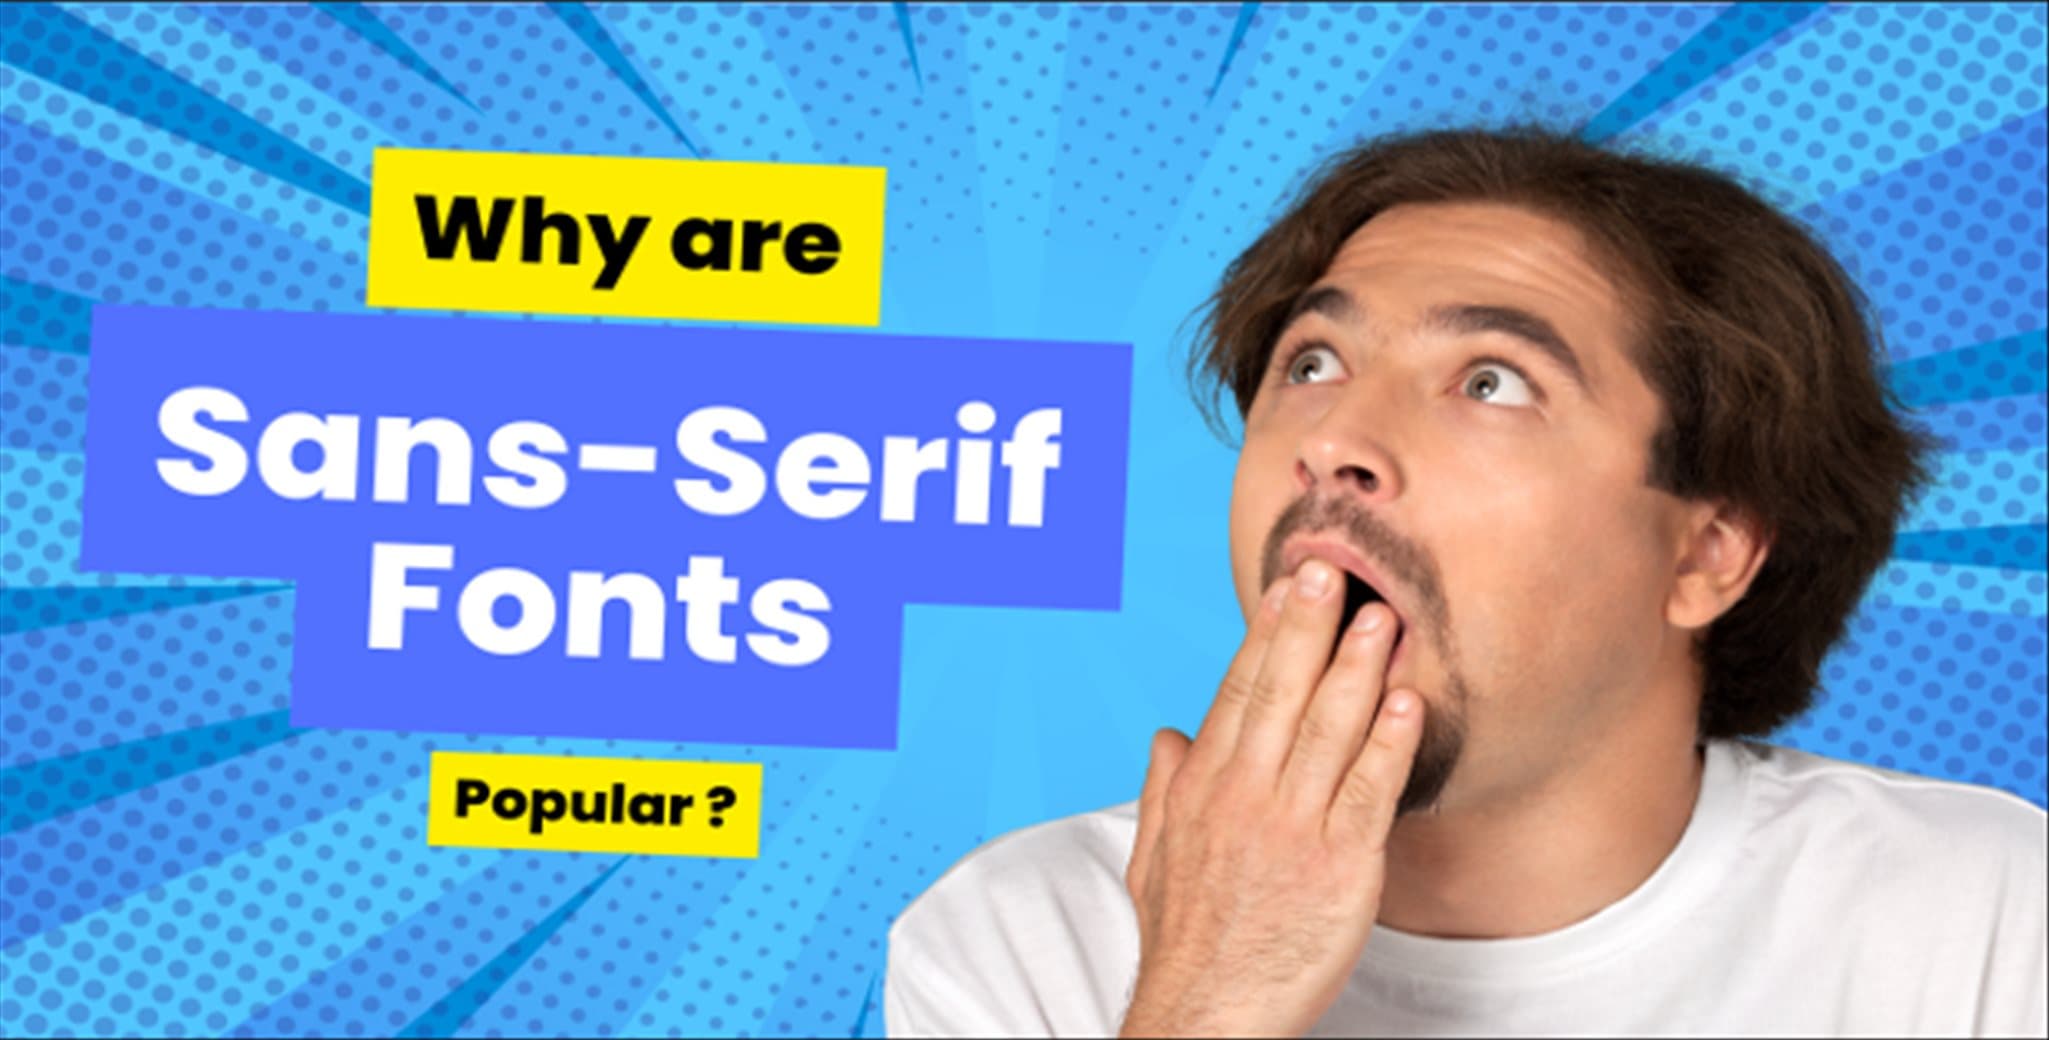 Why are Sans-Serif Fonts Popular?